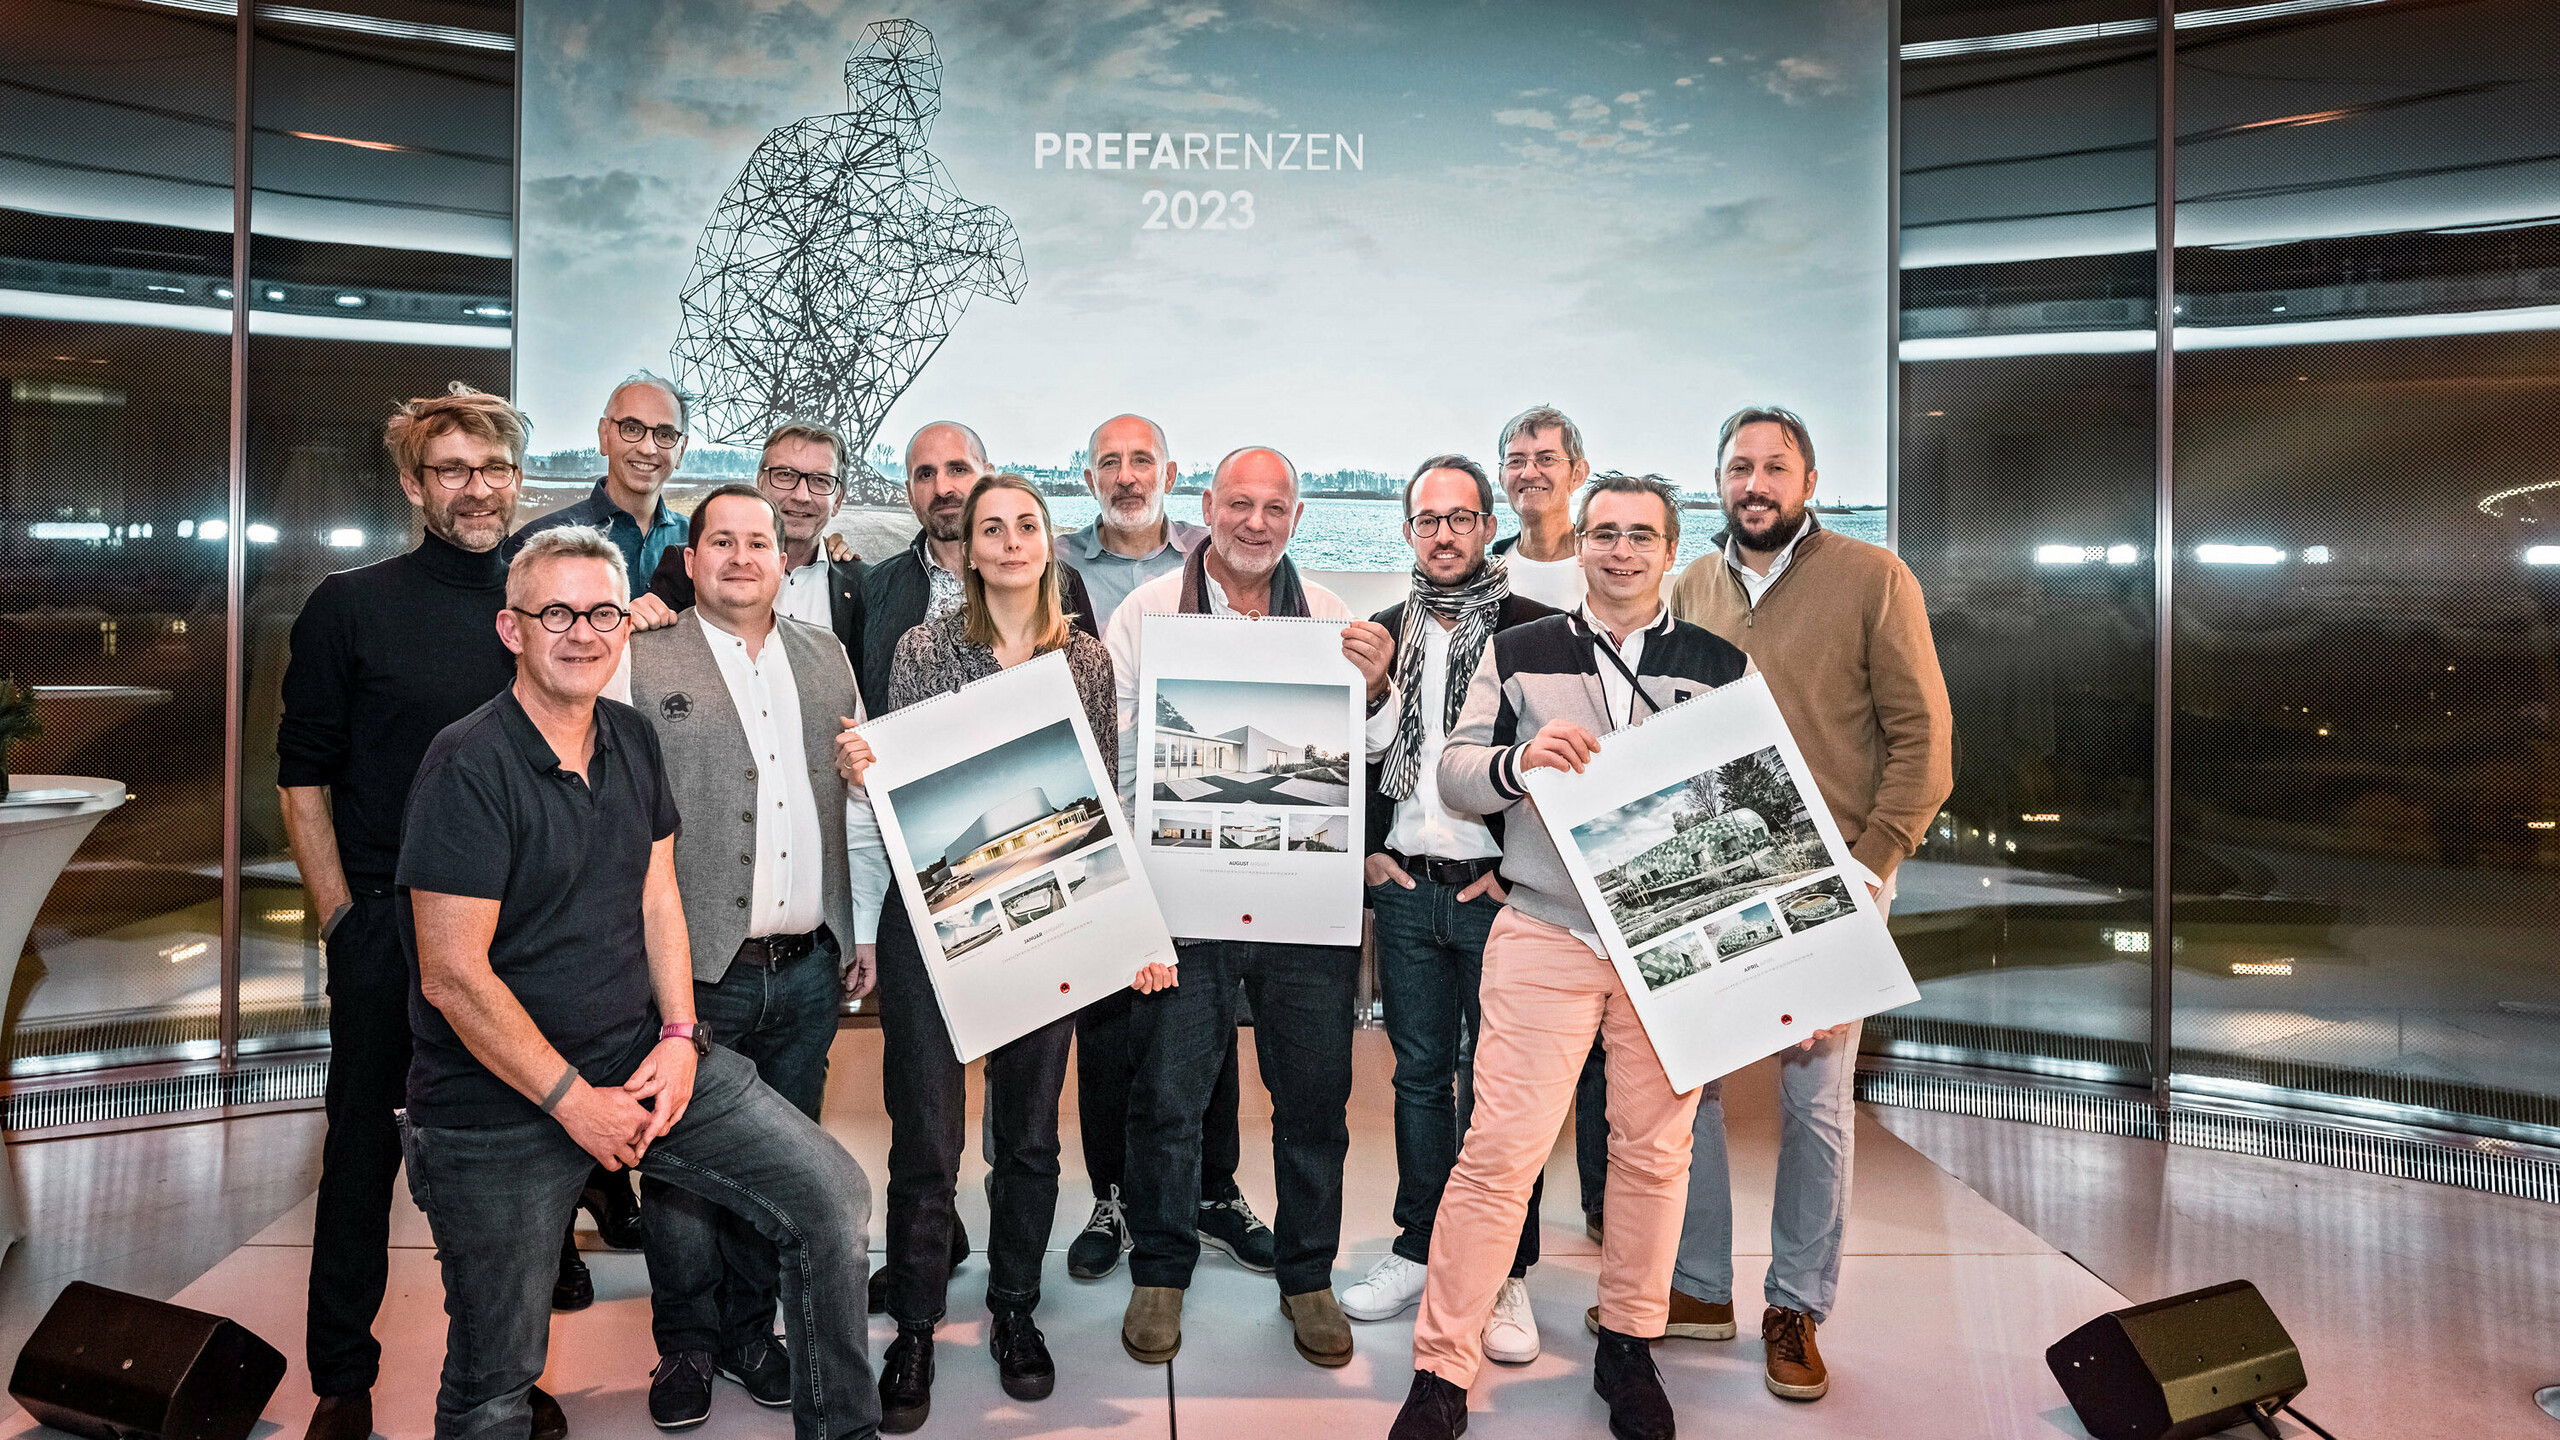 Some of the participating architects, installers and PREFA national subsidiaries on the stage with the PREFARENZEN calendar in their hand.